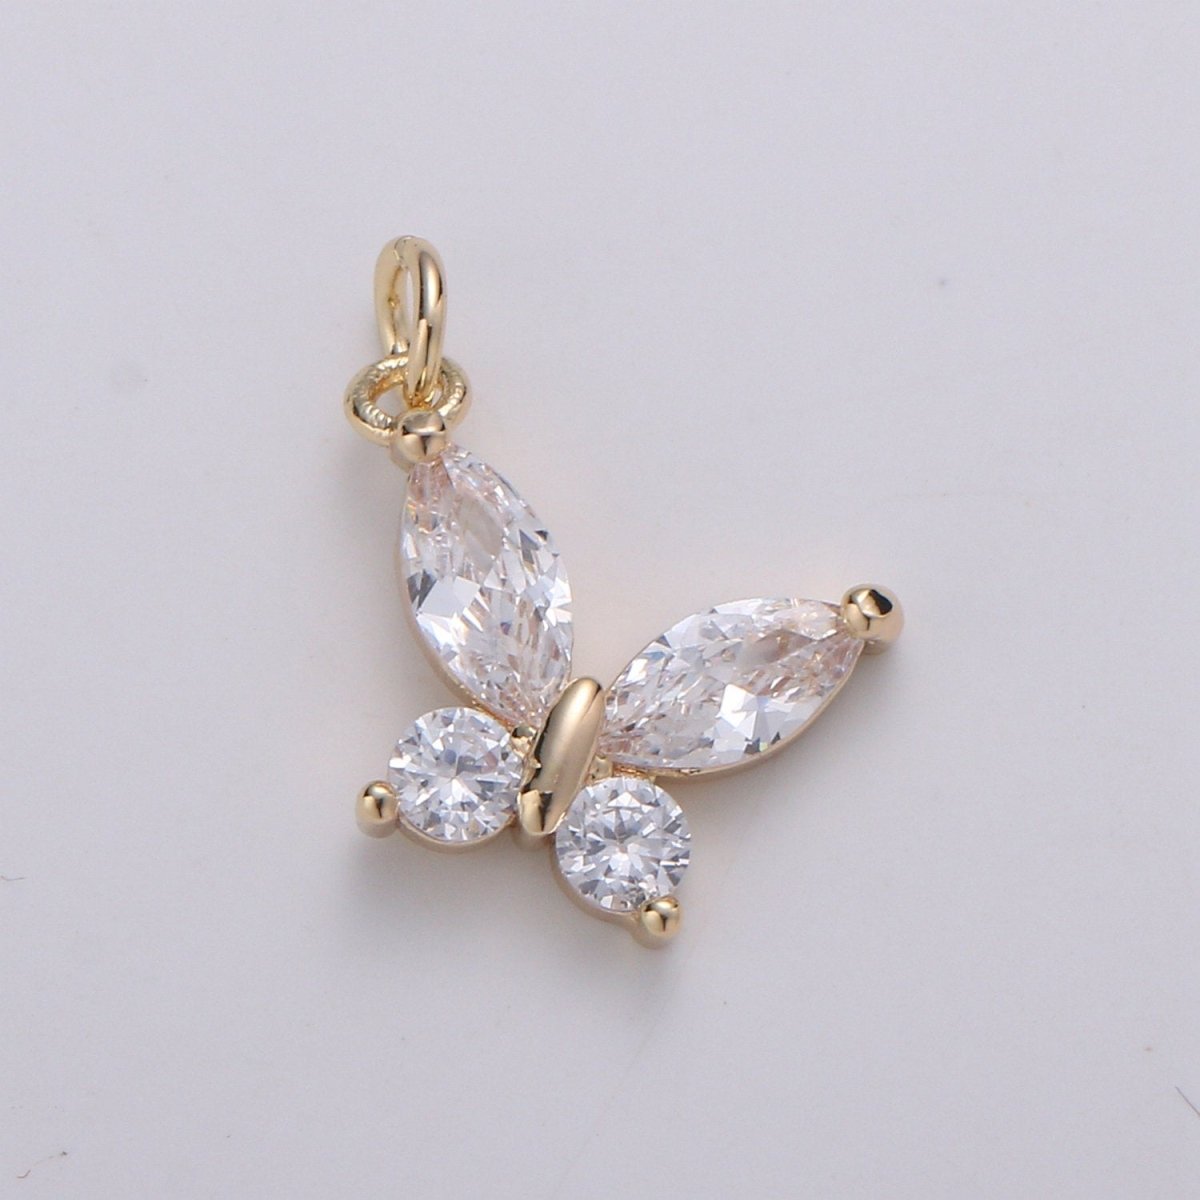 24k Gold Filled Pear Cut CZ Butterfly Charm, Cubic Zirconia Mariposa Pendant Charm, Dainty Gold Filled Charm, For DIY Jewelry D-384 D-775 - DLUXCA